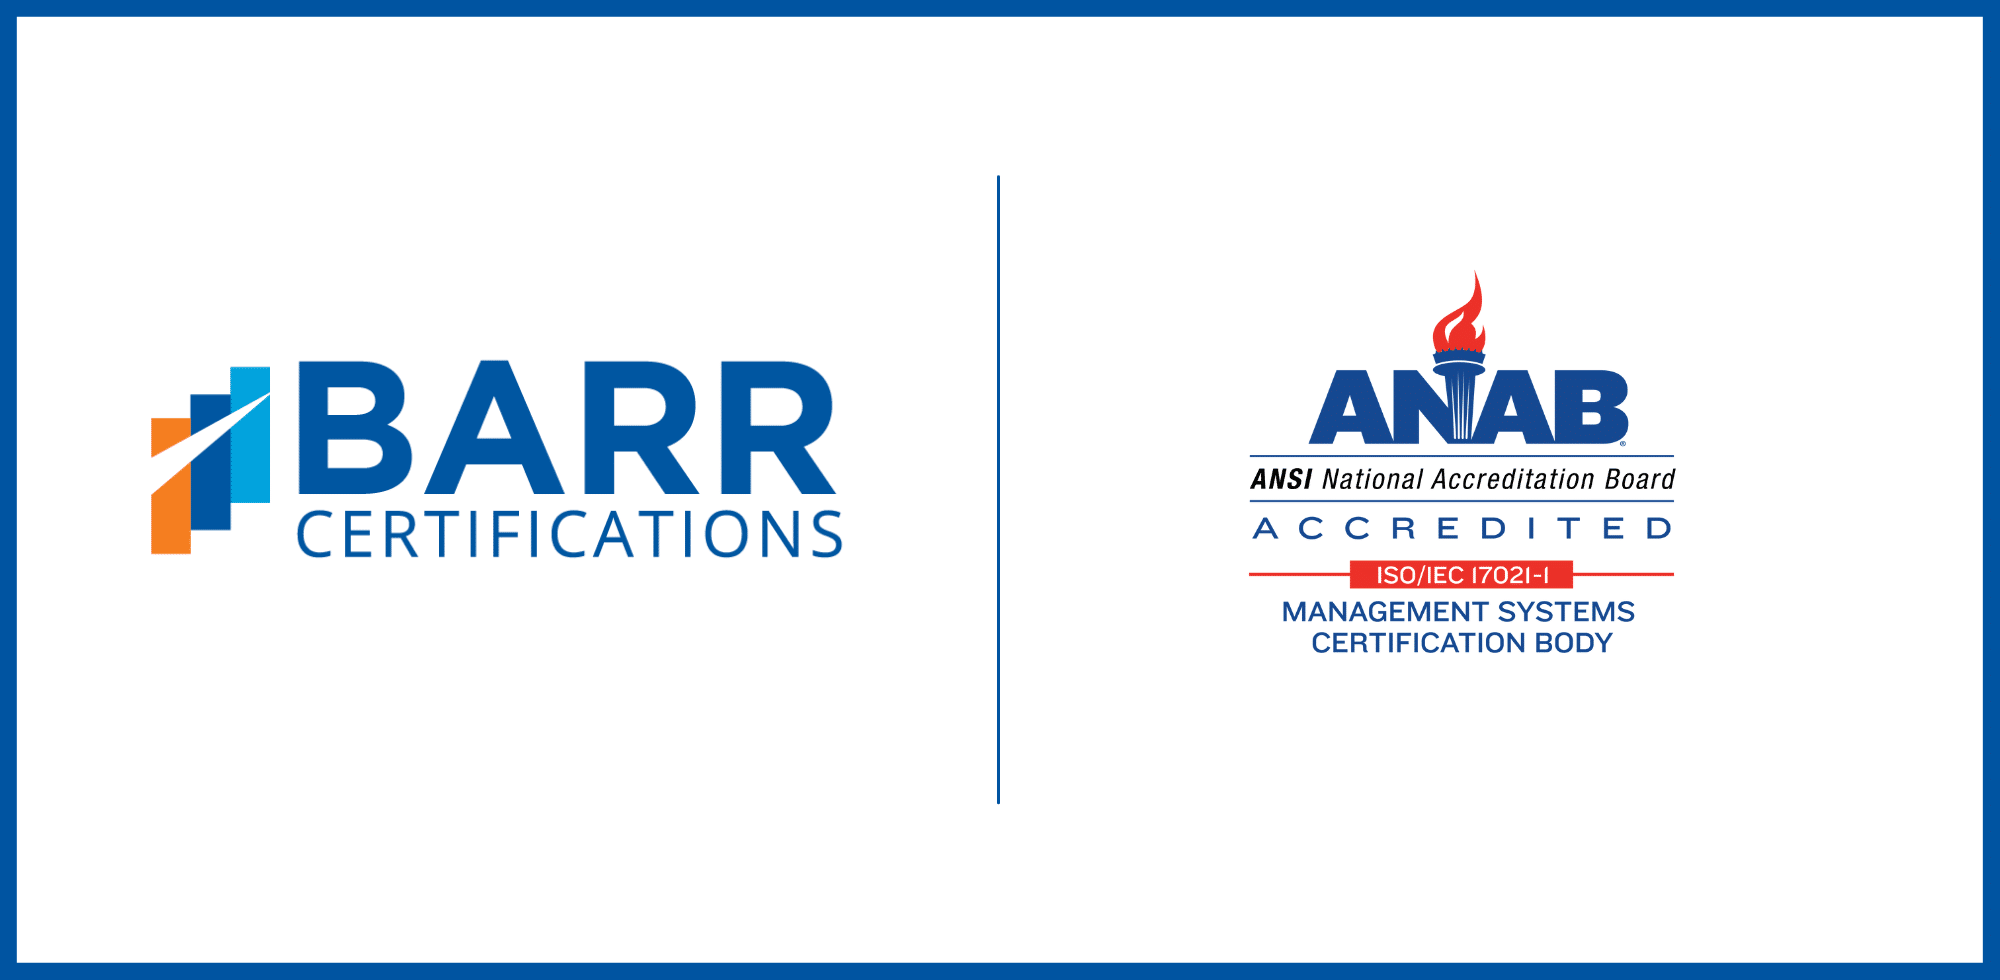 BARR Certifications and BARR Advisory Partner to Be One of Only 9 Firms in the U.S. Eligible to Perform Both ISO/IEC 27001 and SOC 2 Audits